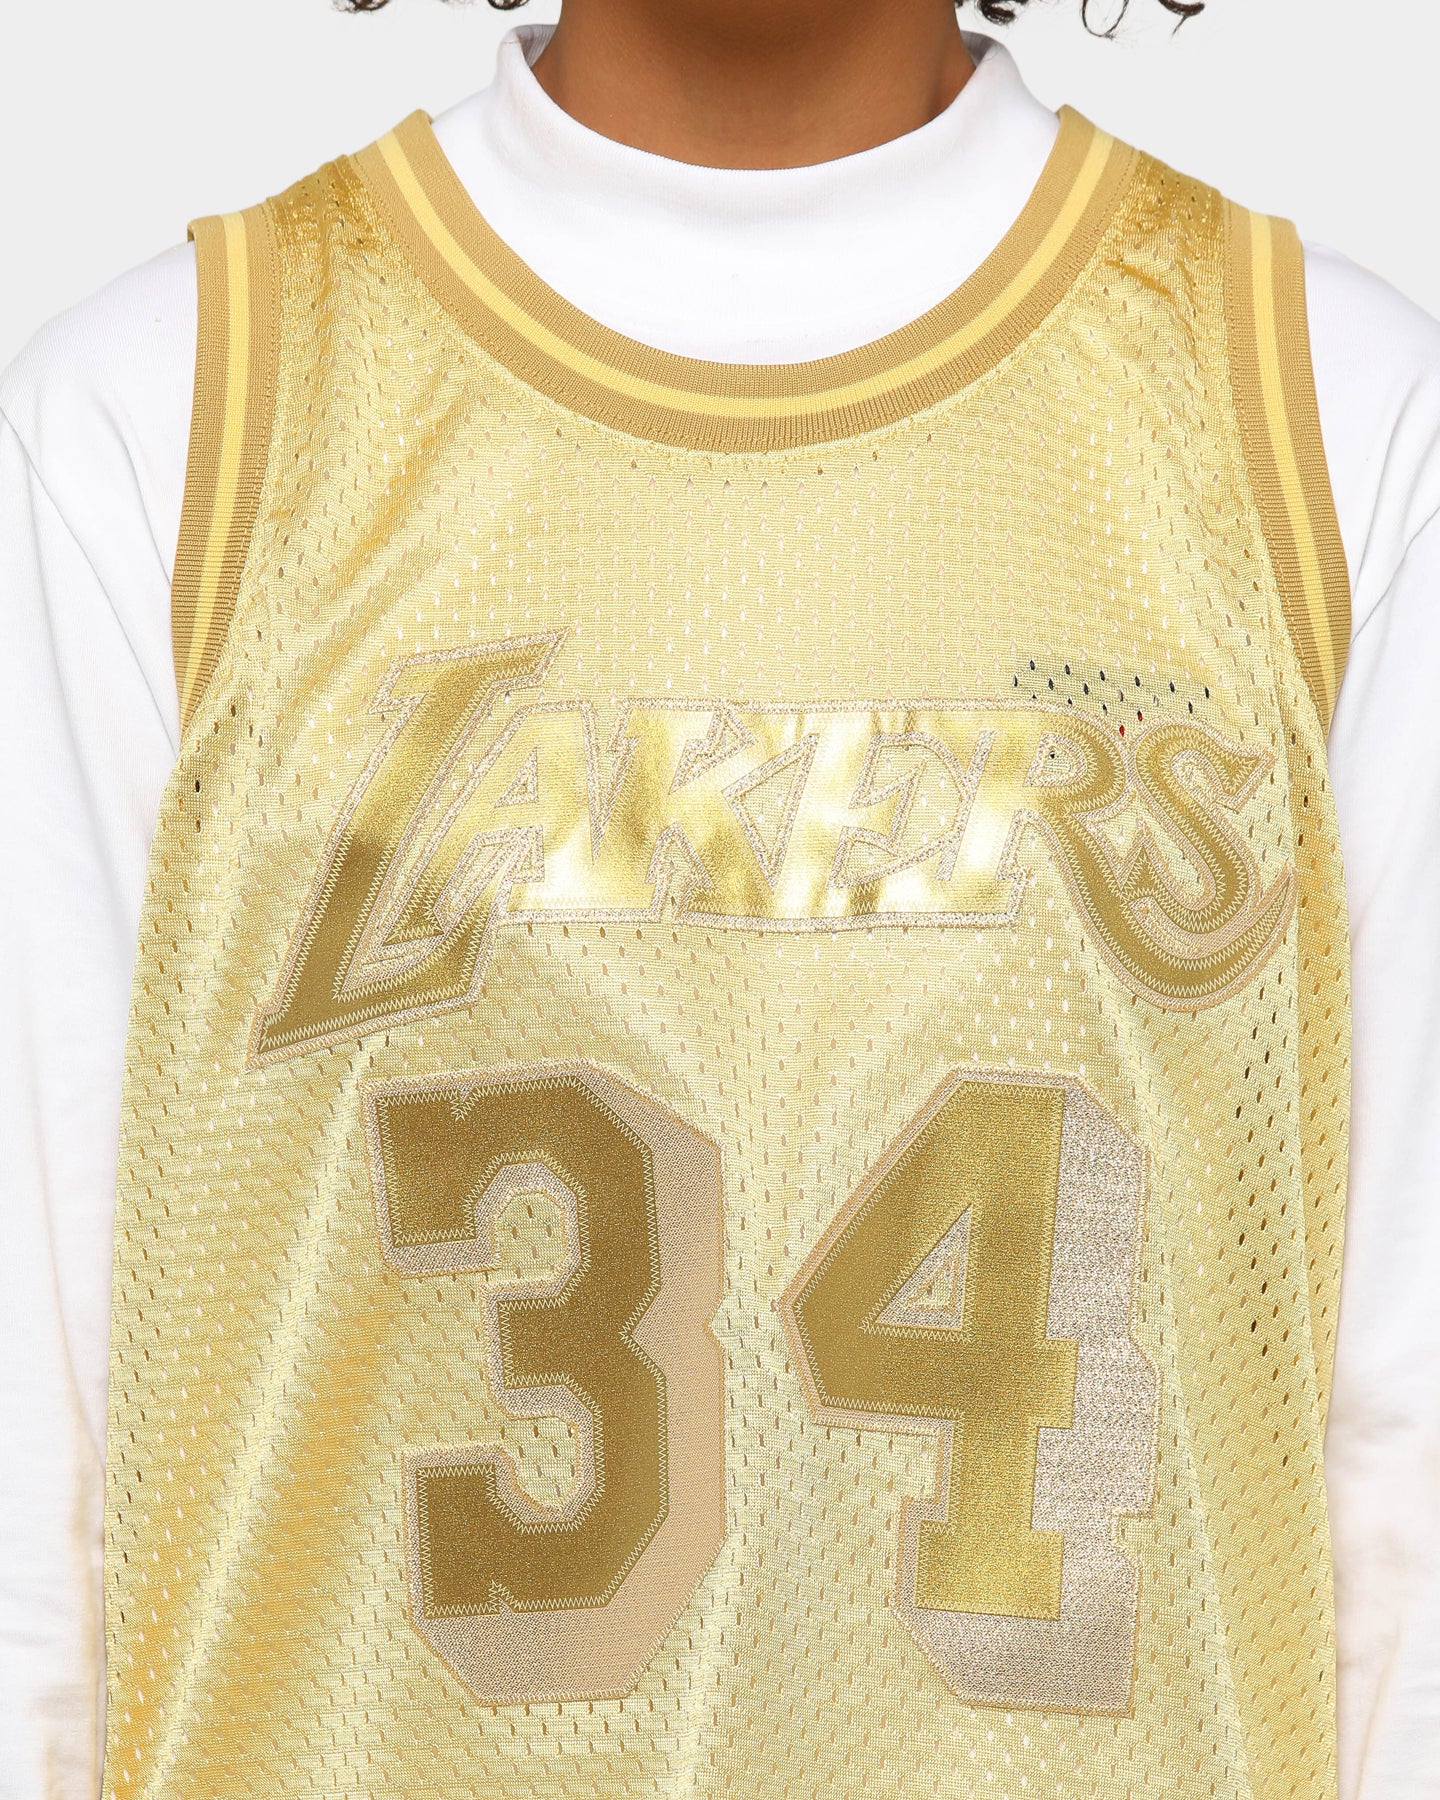 shaq lakers jersey number